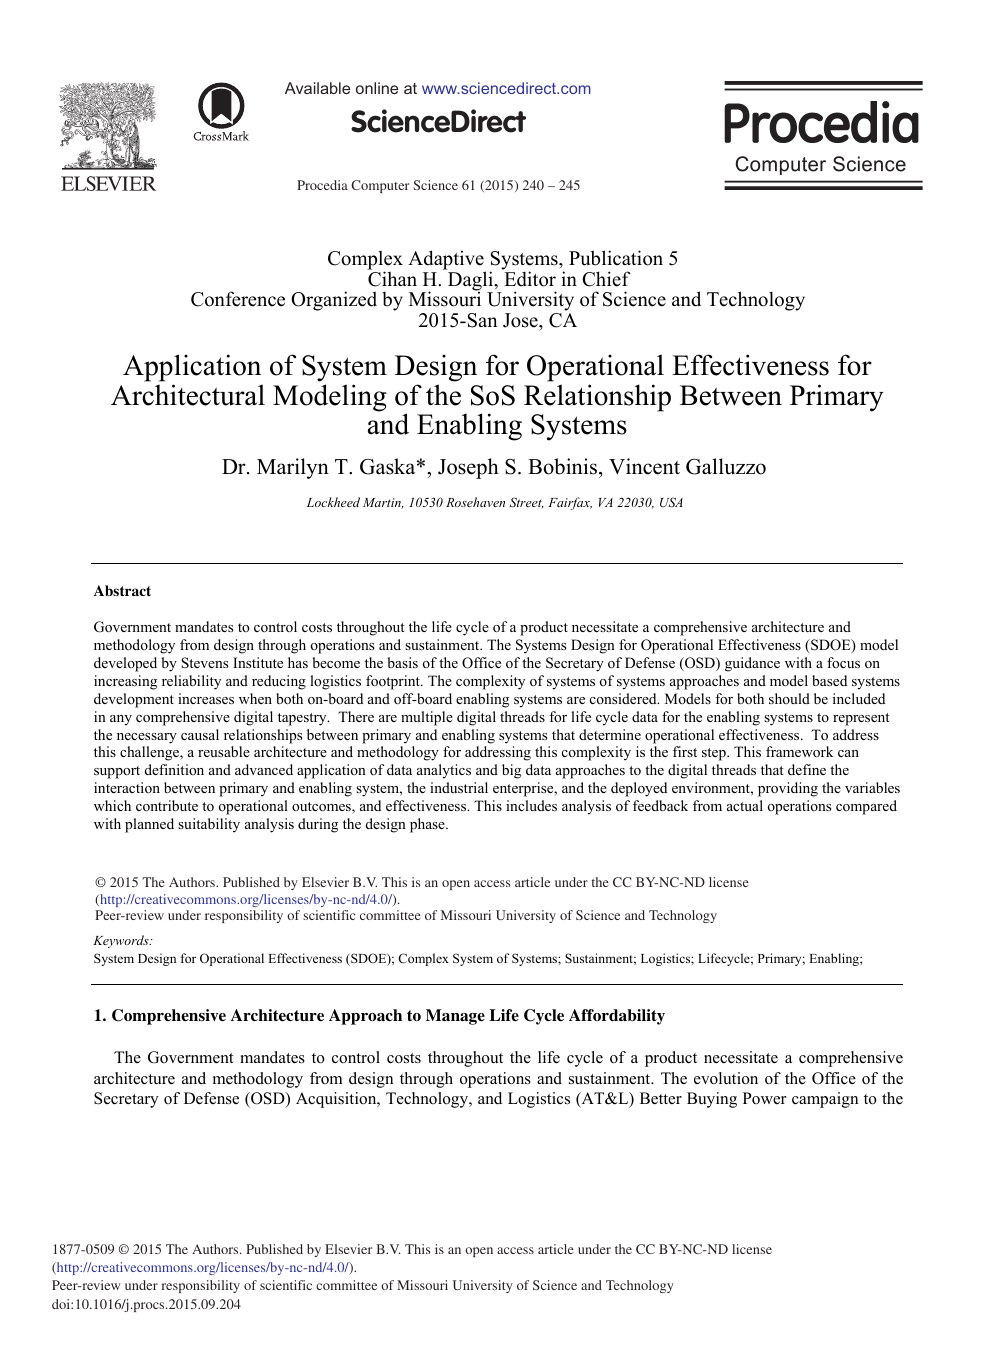 Application Of System Design For Operational Effectiveness For Architectural Modeling Of The Sos Relationship Between Primary And Enabling Systems Topic Of Research Paper In Materials Engineering Download Scholarly Article Pdf And